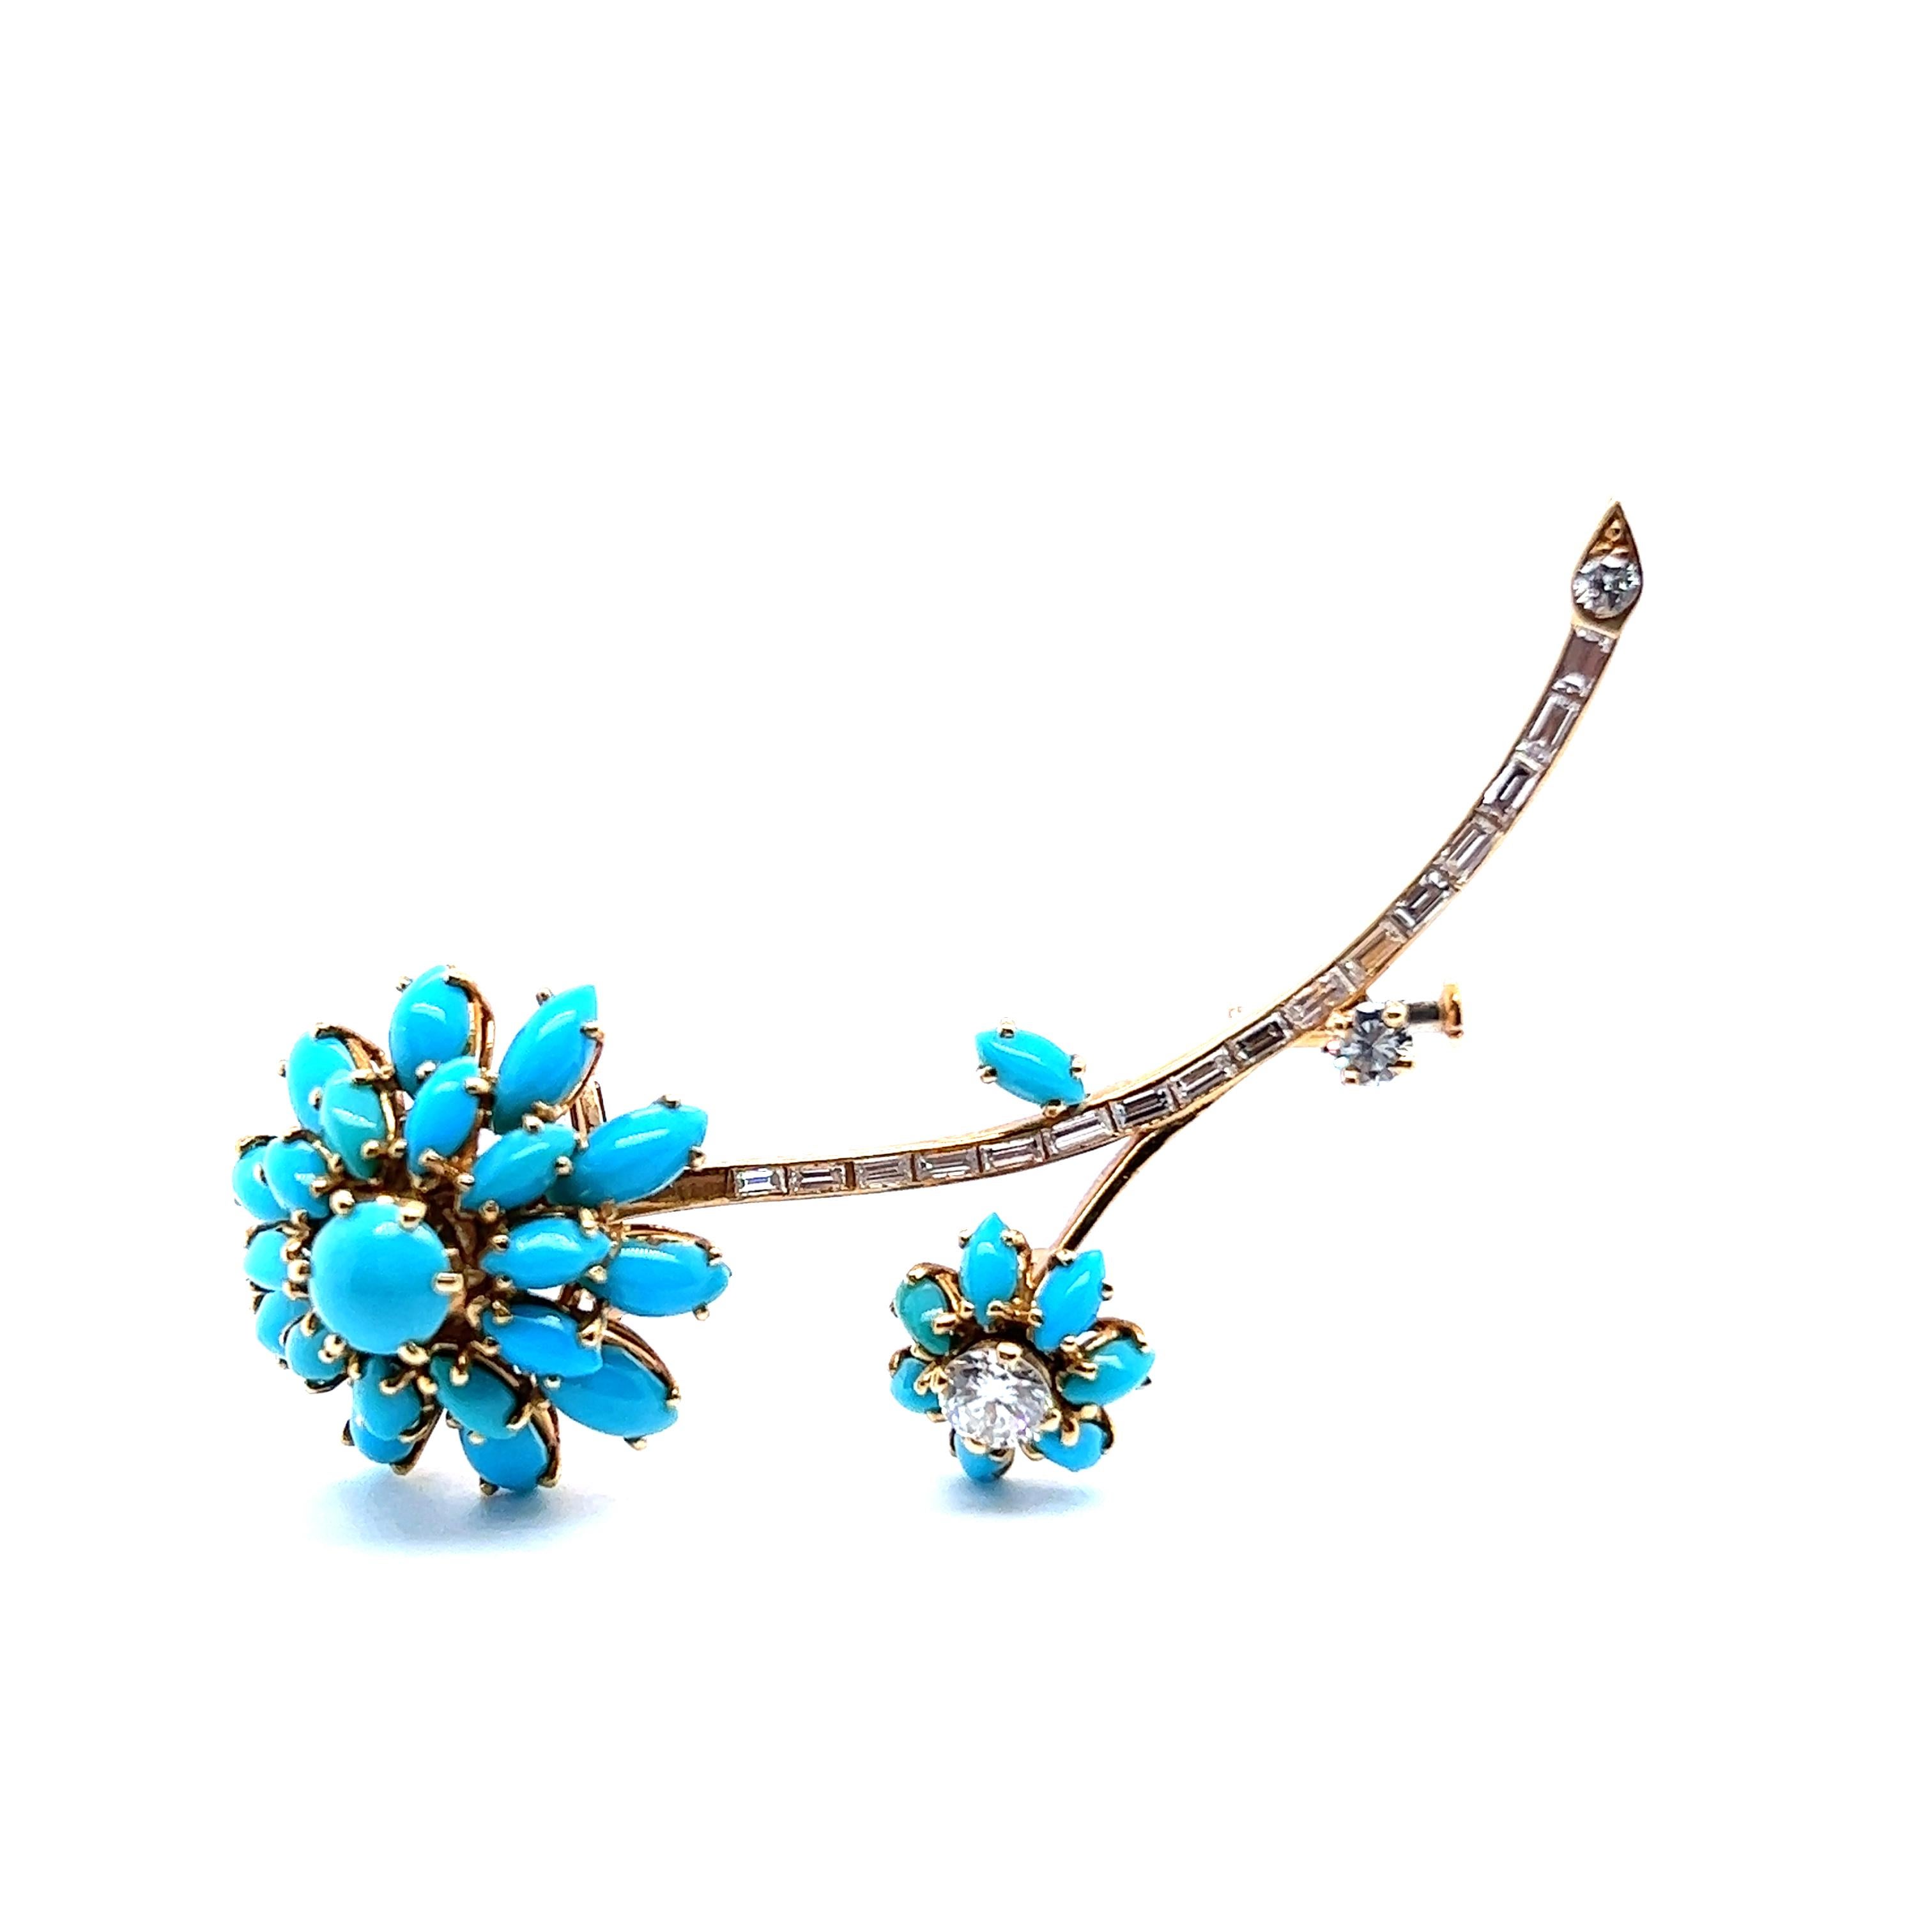 This turquoise flower brooch has a timeless charm and sophistication. The brooch is set with 29 blue cabochon-cut gemstones, each one a testament to an enduring historical legacy. Rooted in tradition and symbolism, turquoise reflects protection,